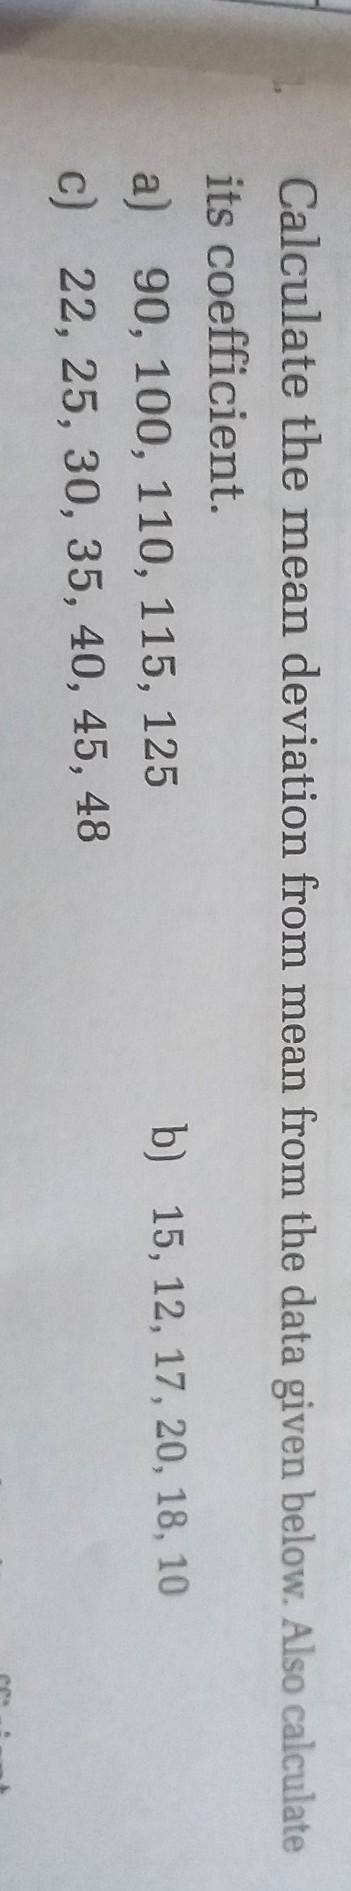 Can you solve question no.b